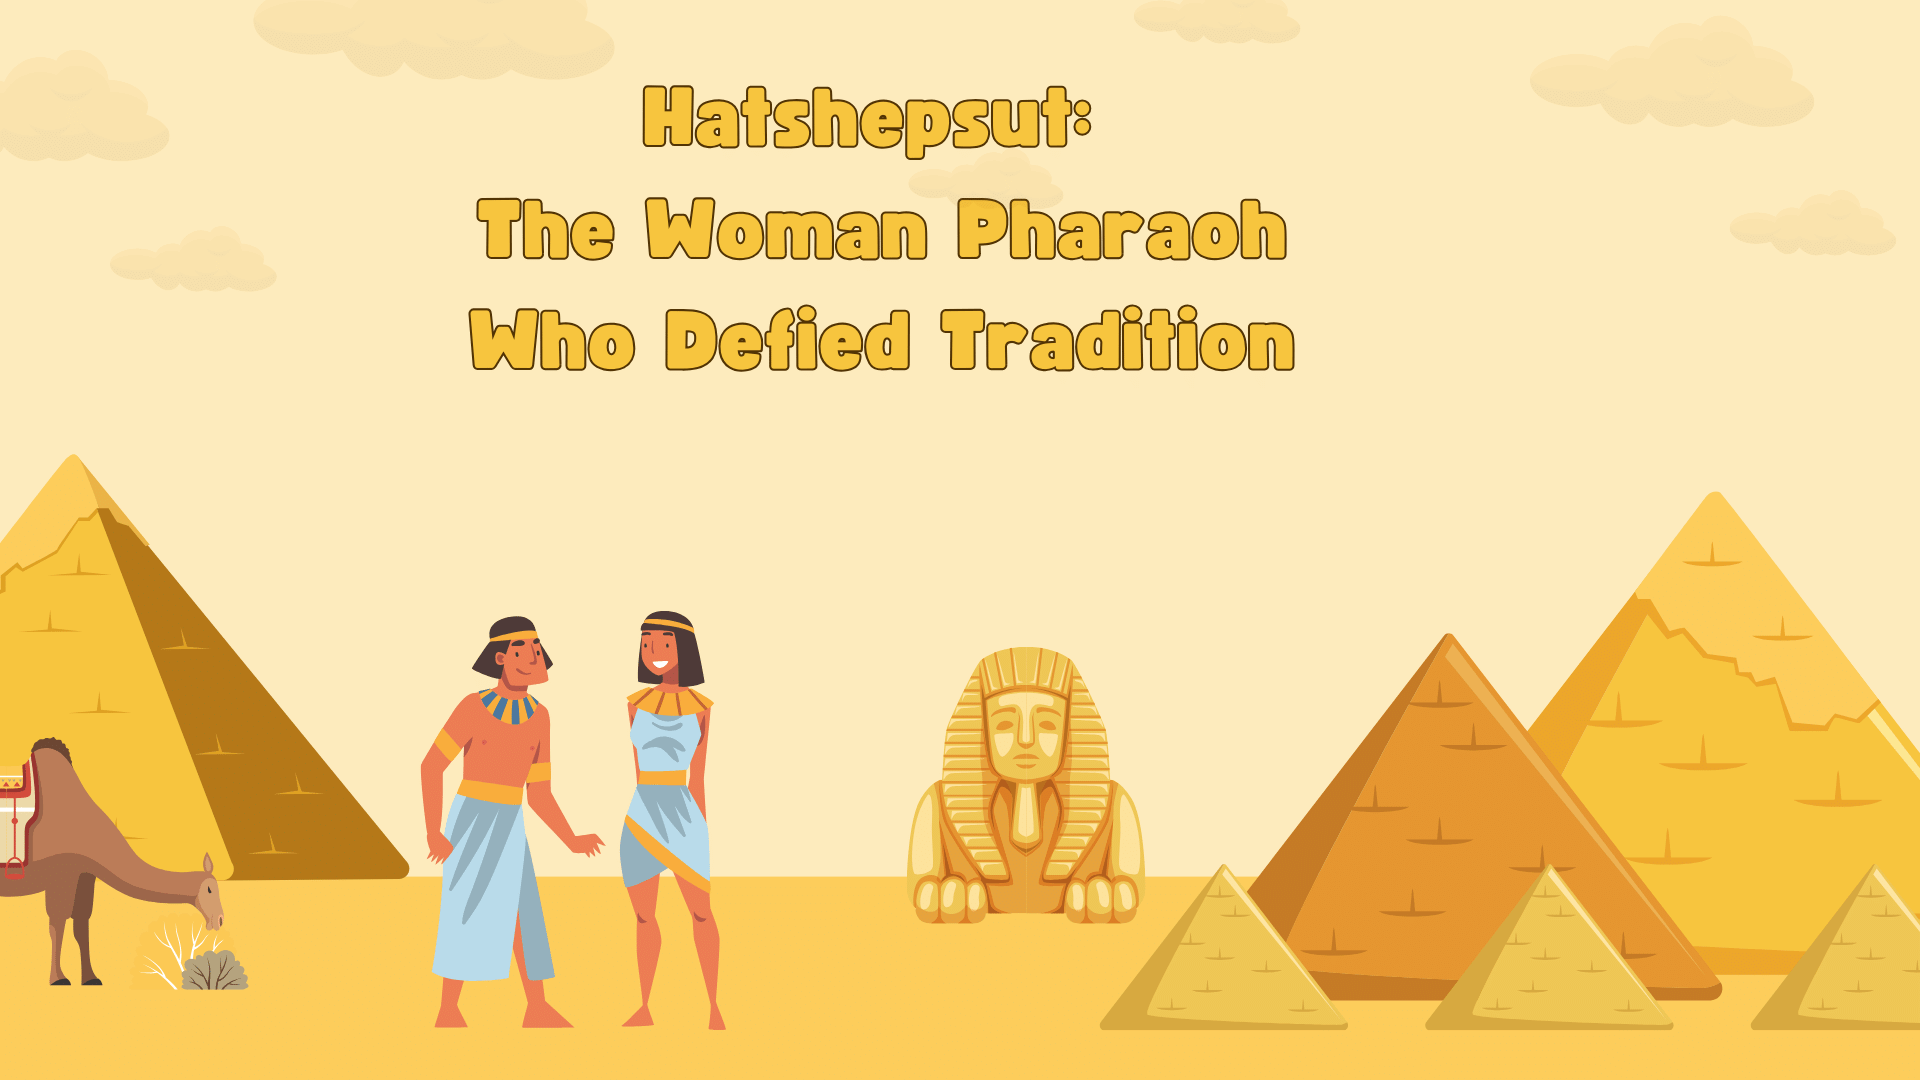 Hatshepsut: The Woman Pharaoh Who Defied Tradition